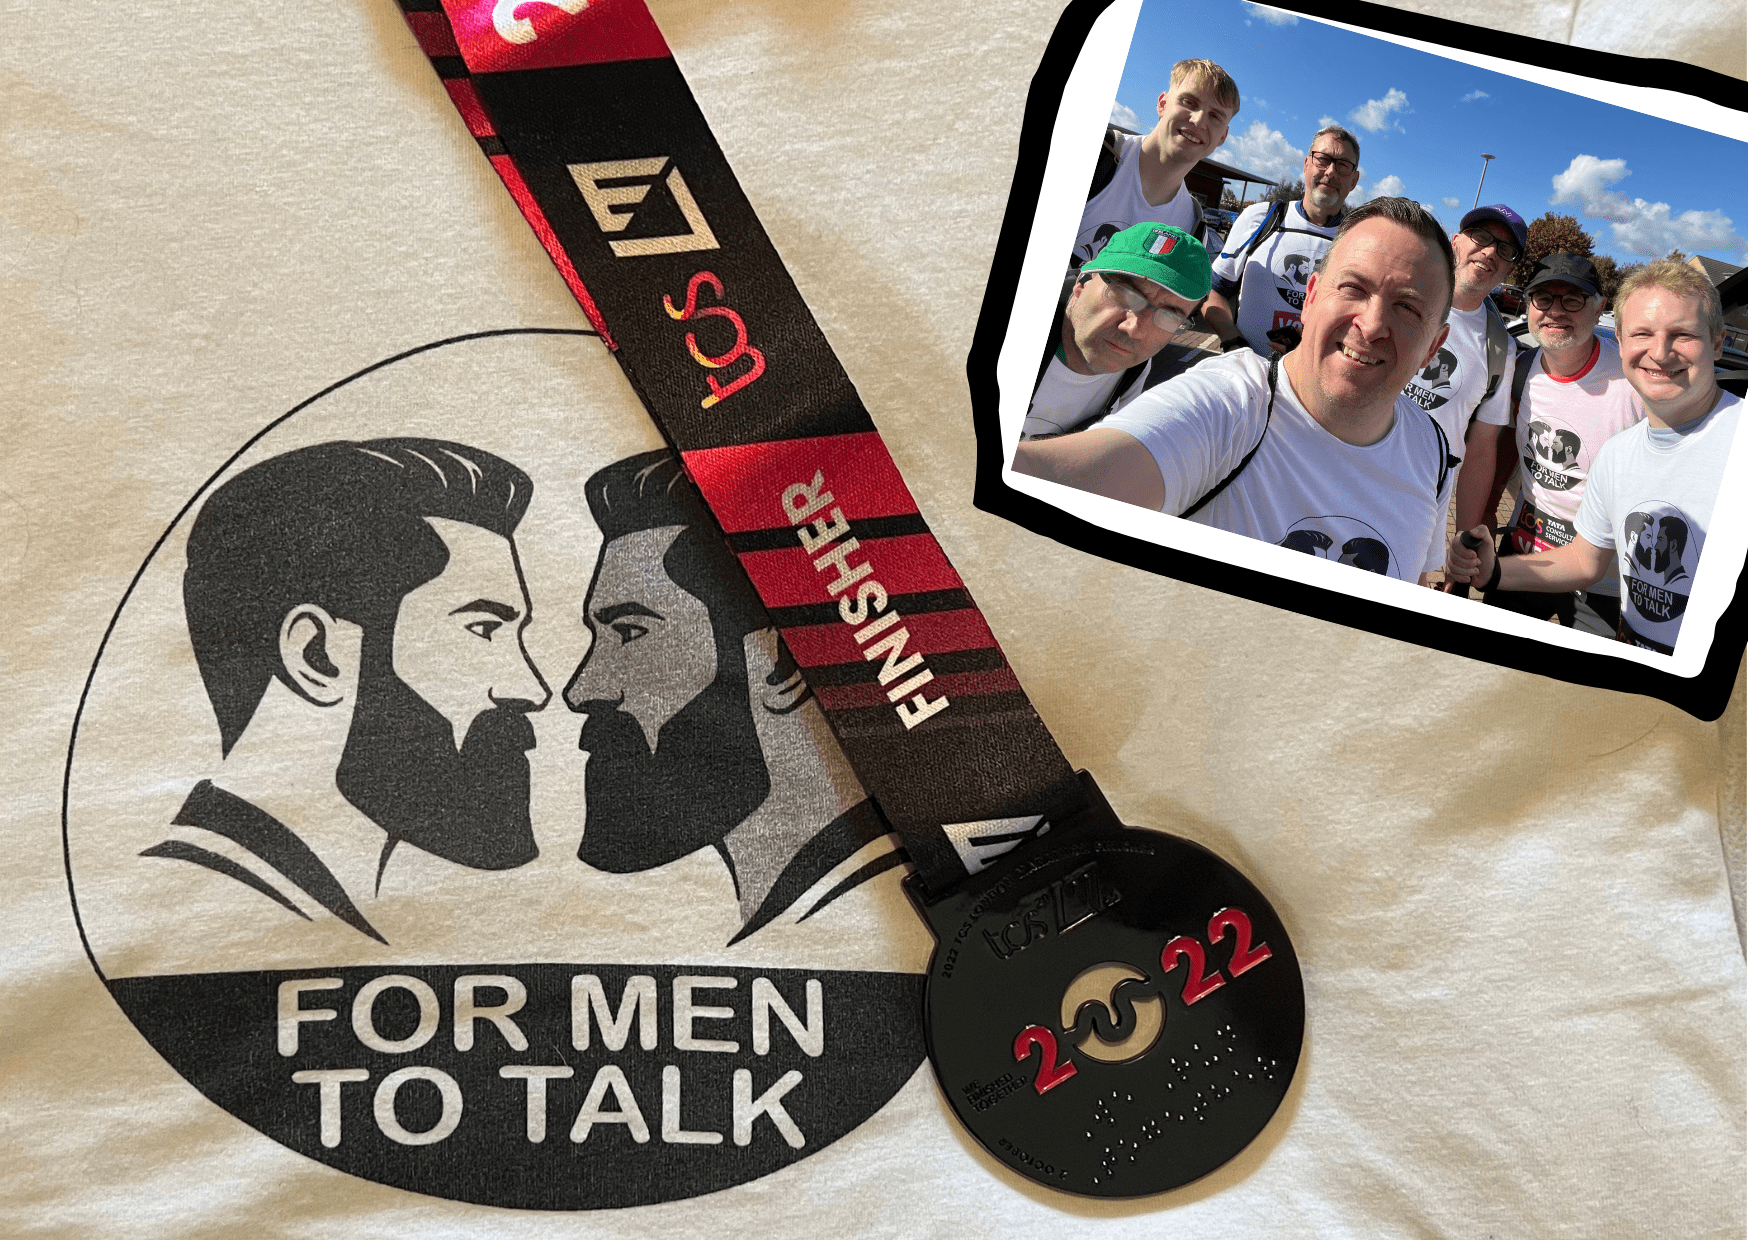 We Did It! For Men To Talk completed the Virtual London Marathon 2022